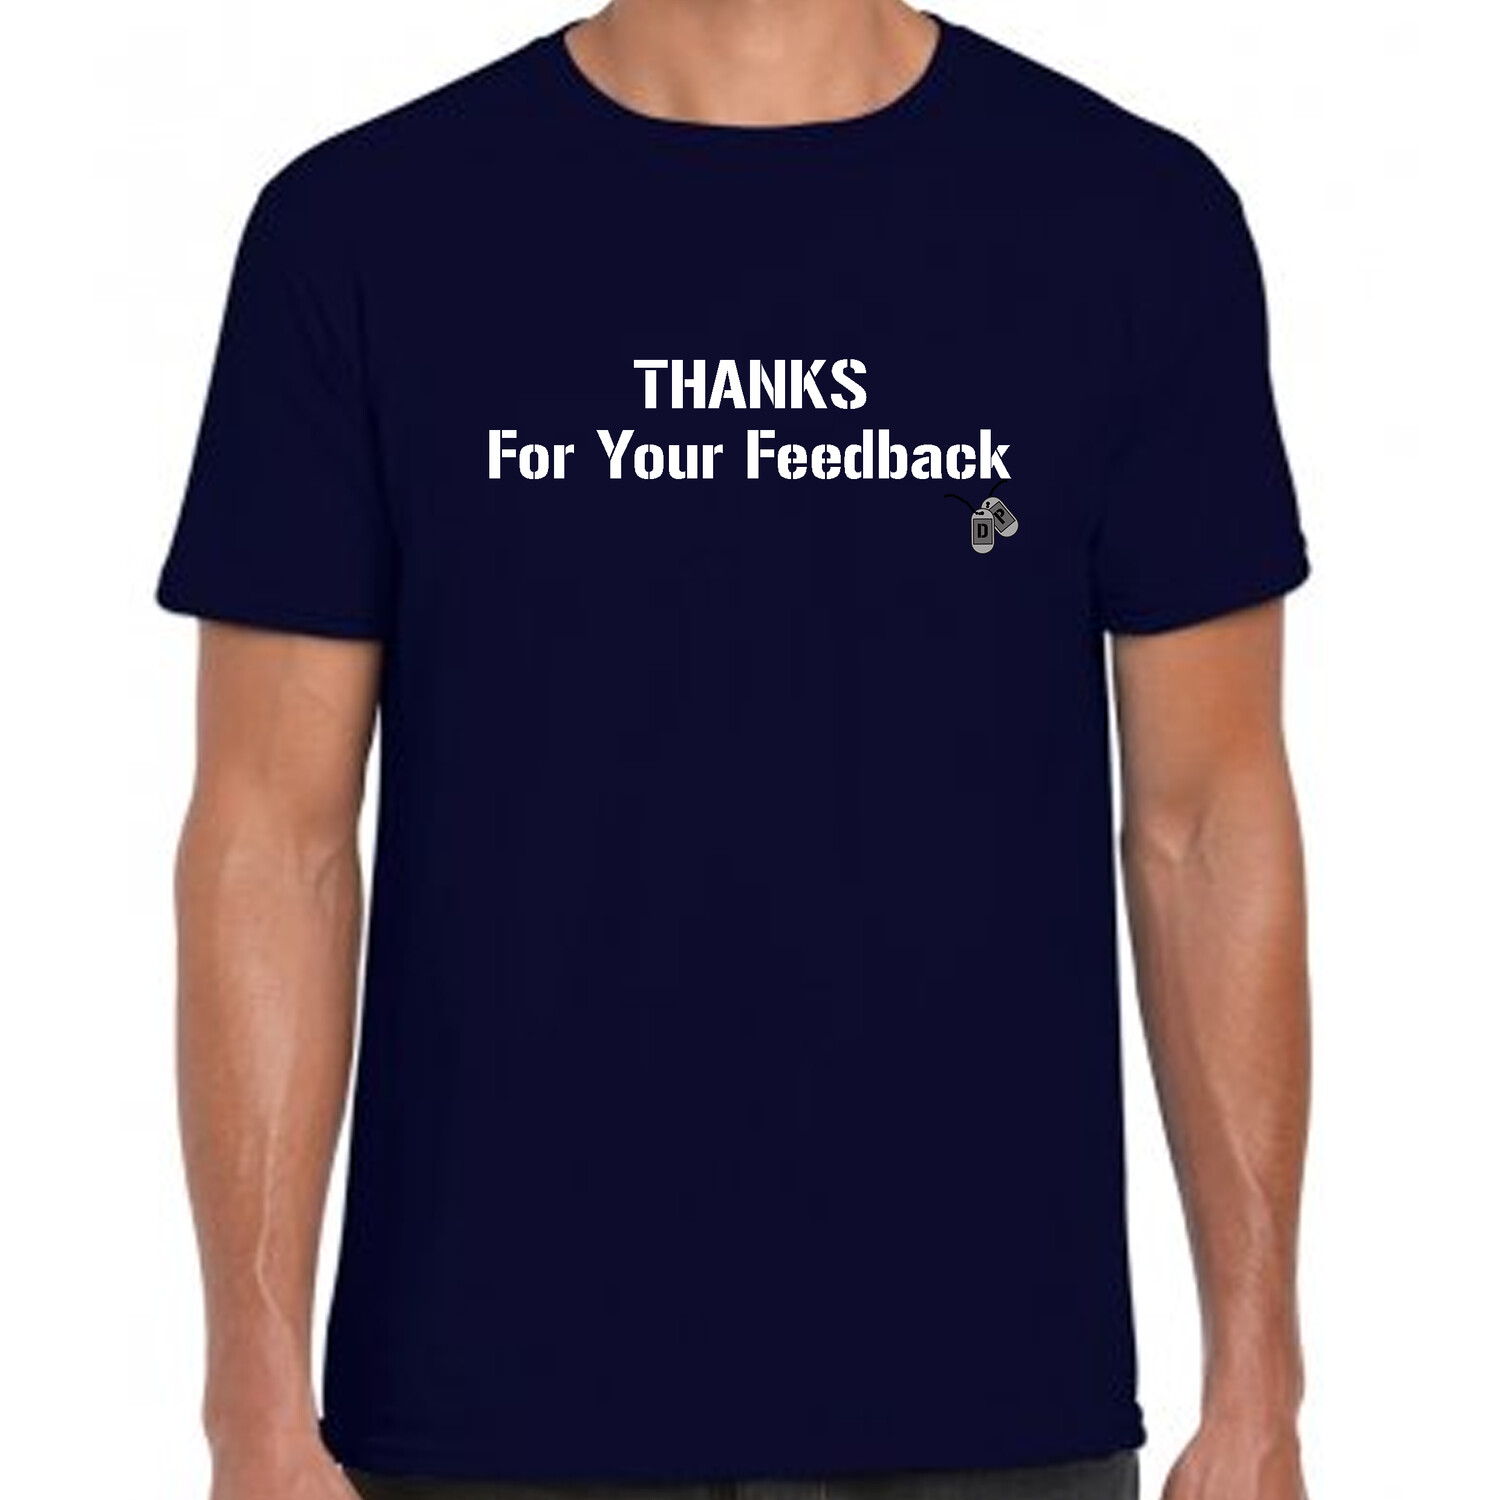 THANKS for your feedback T-shirt